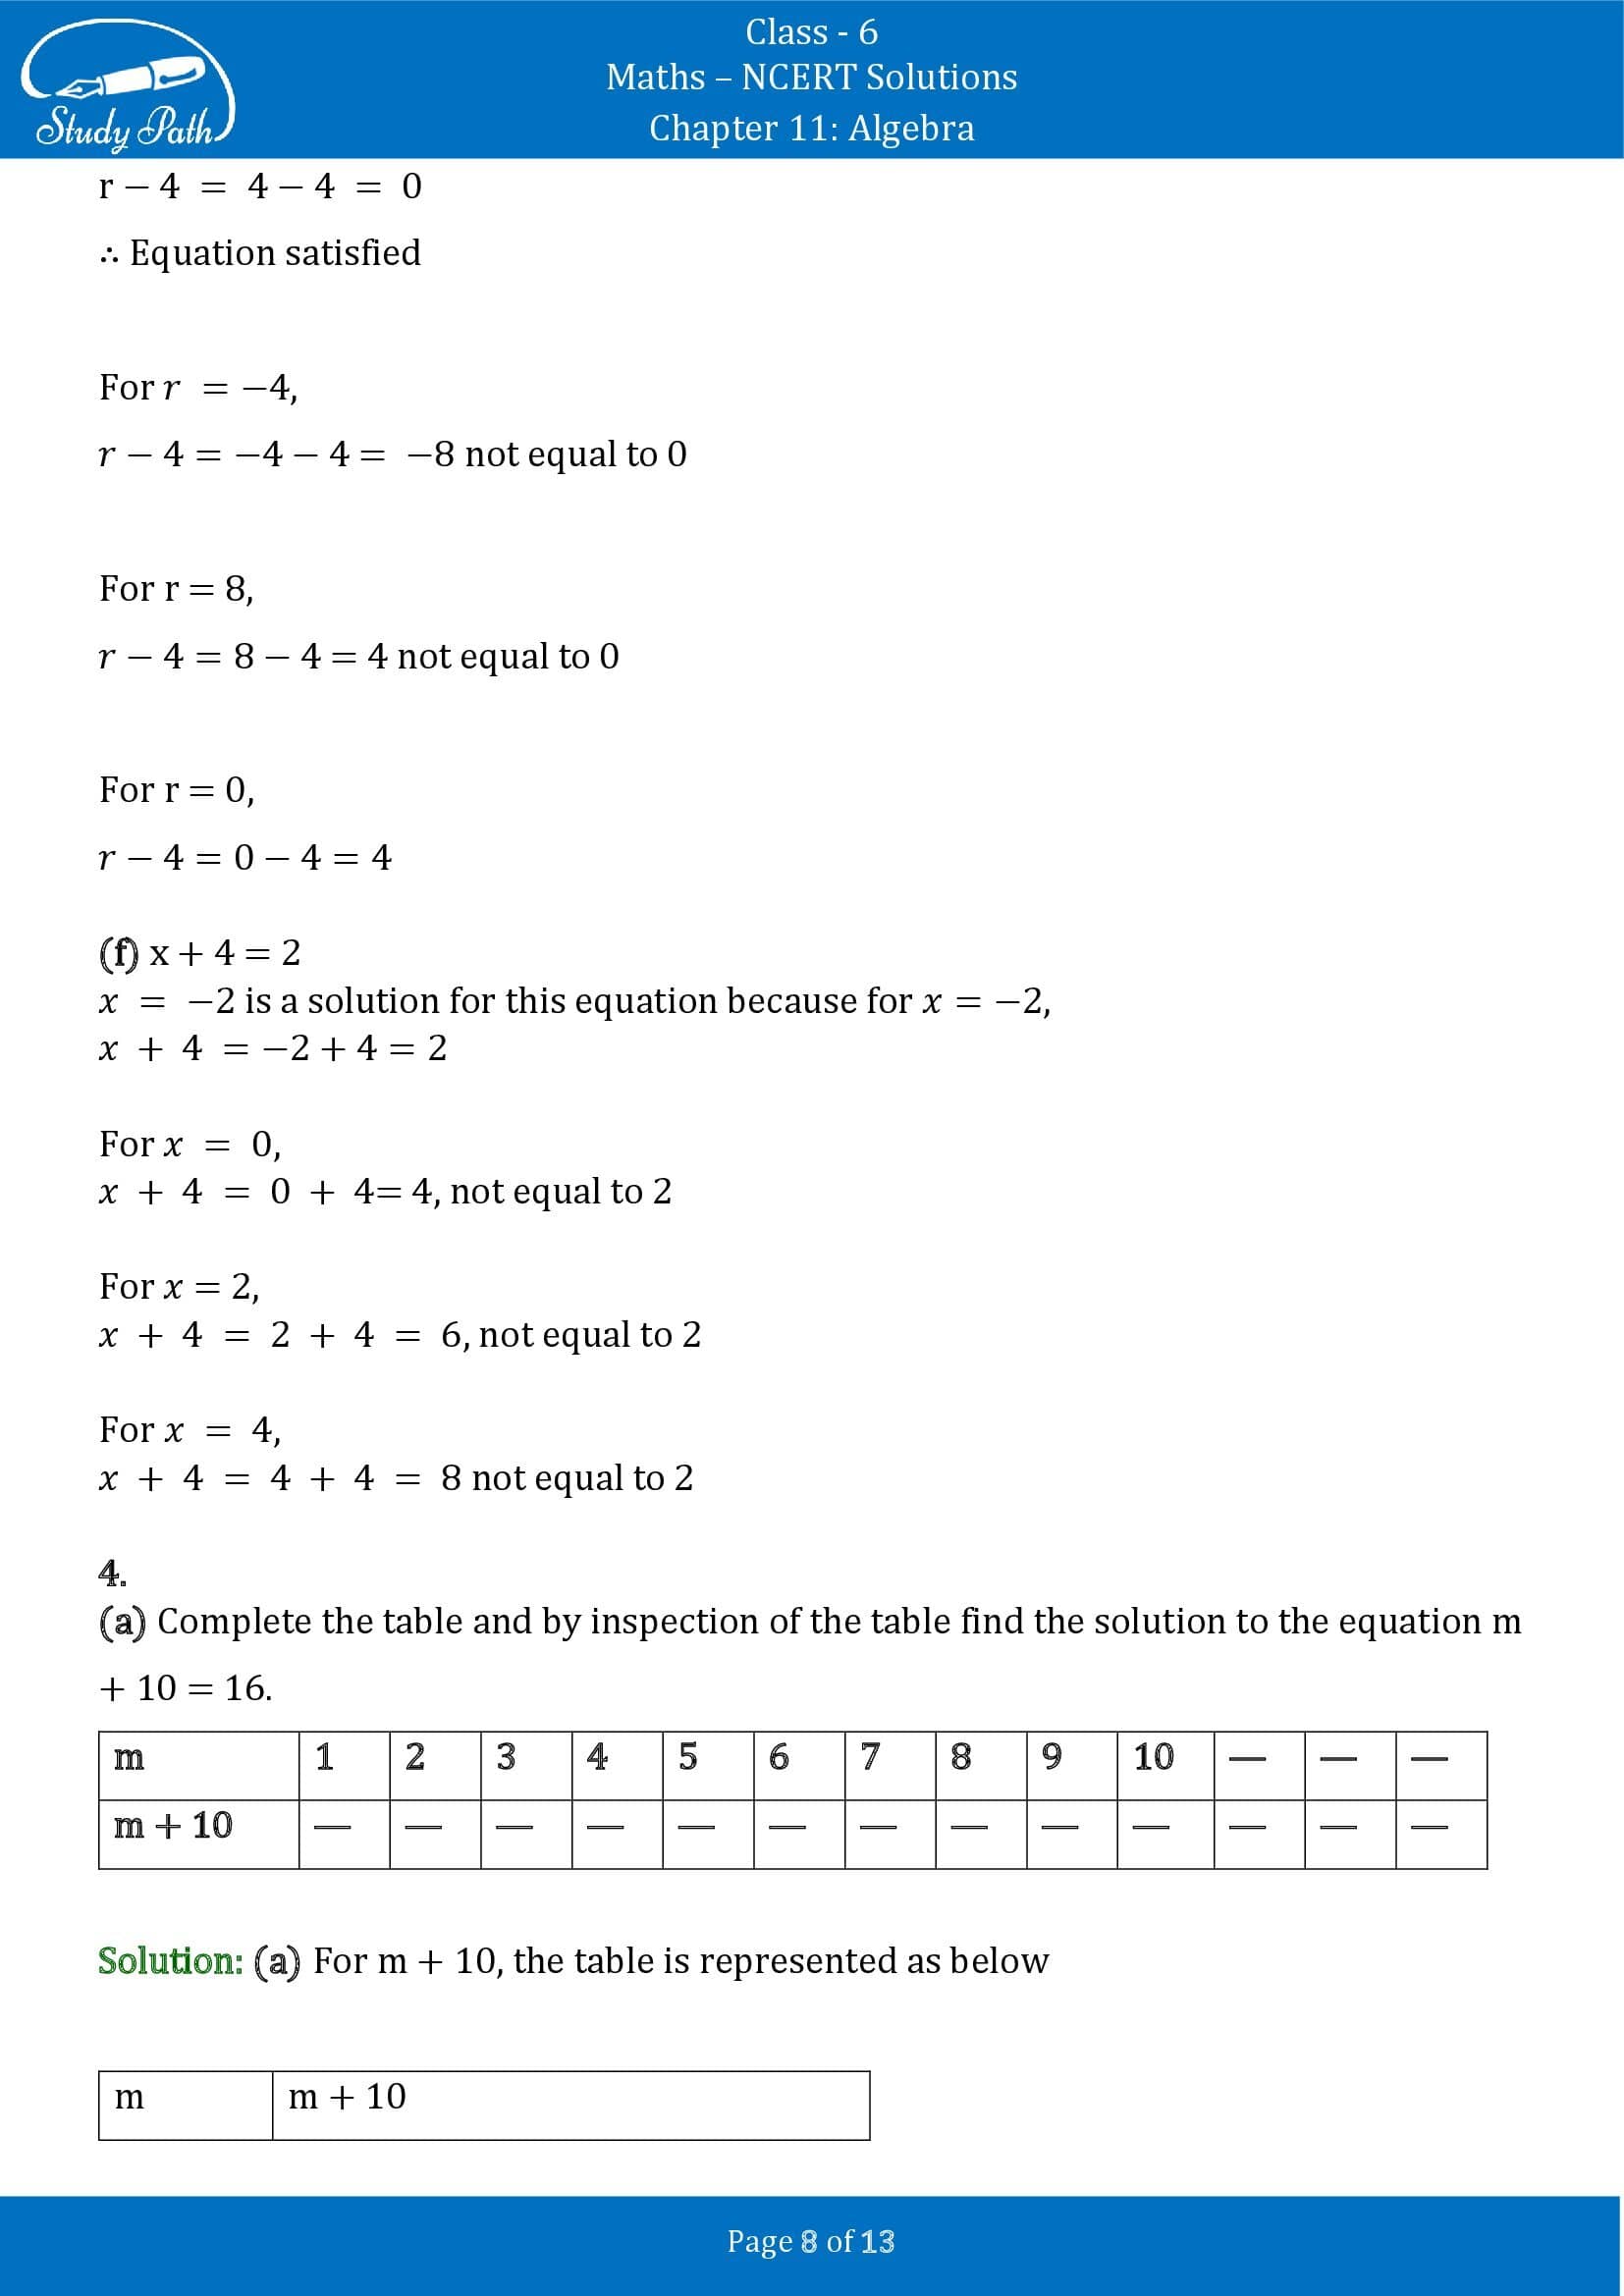 NCERT Solutions for Class 6 Maths Chapter 11 Algebra Exercise 11.5 00008